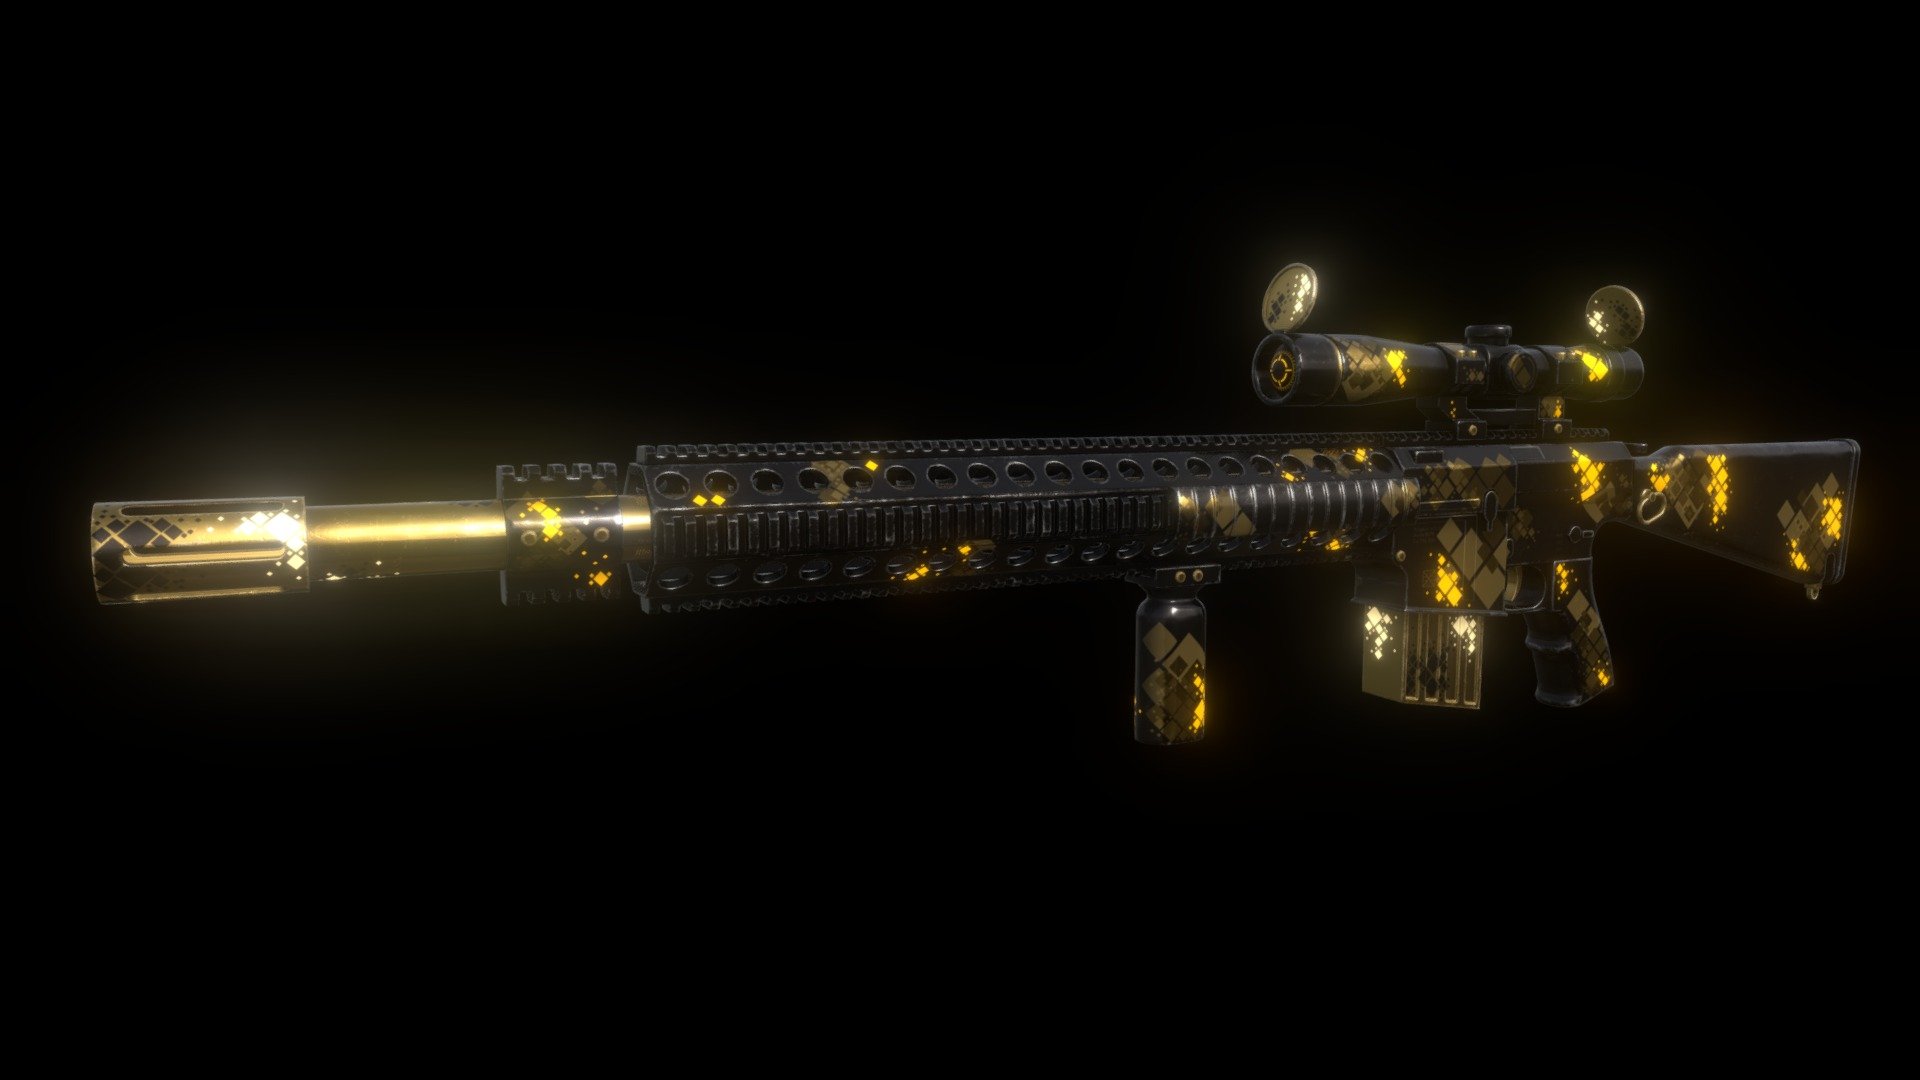 An additional style for the M170 sniper rifle, with a flashy gold theme and emissive detail.  

Free to use 3d model